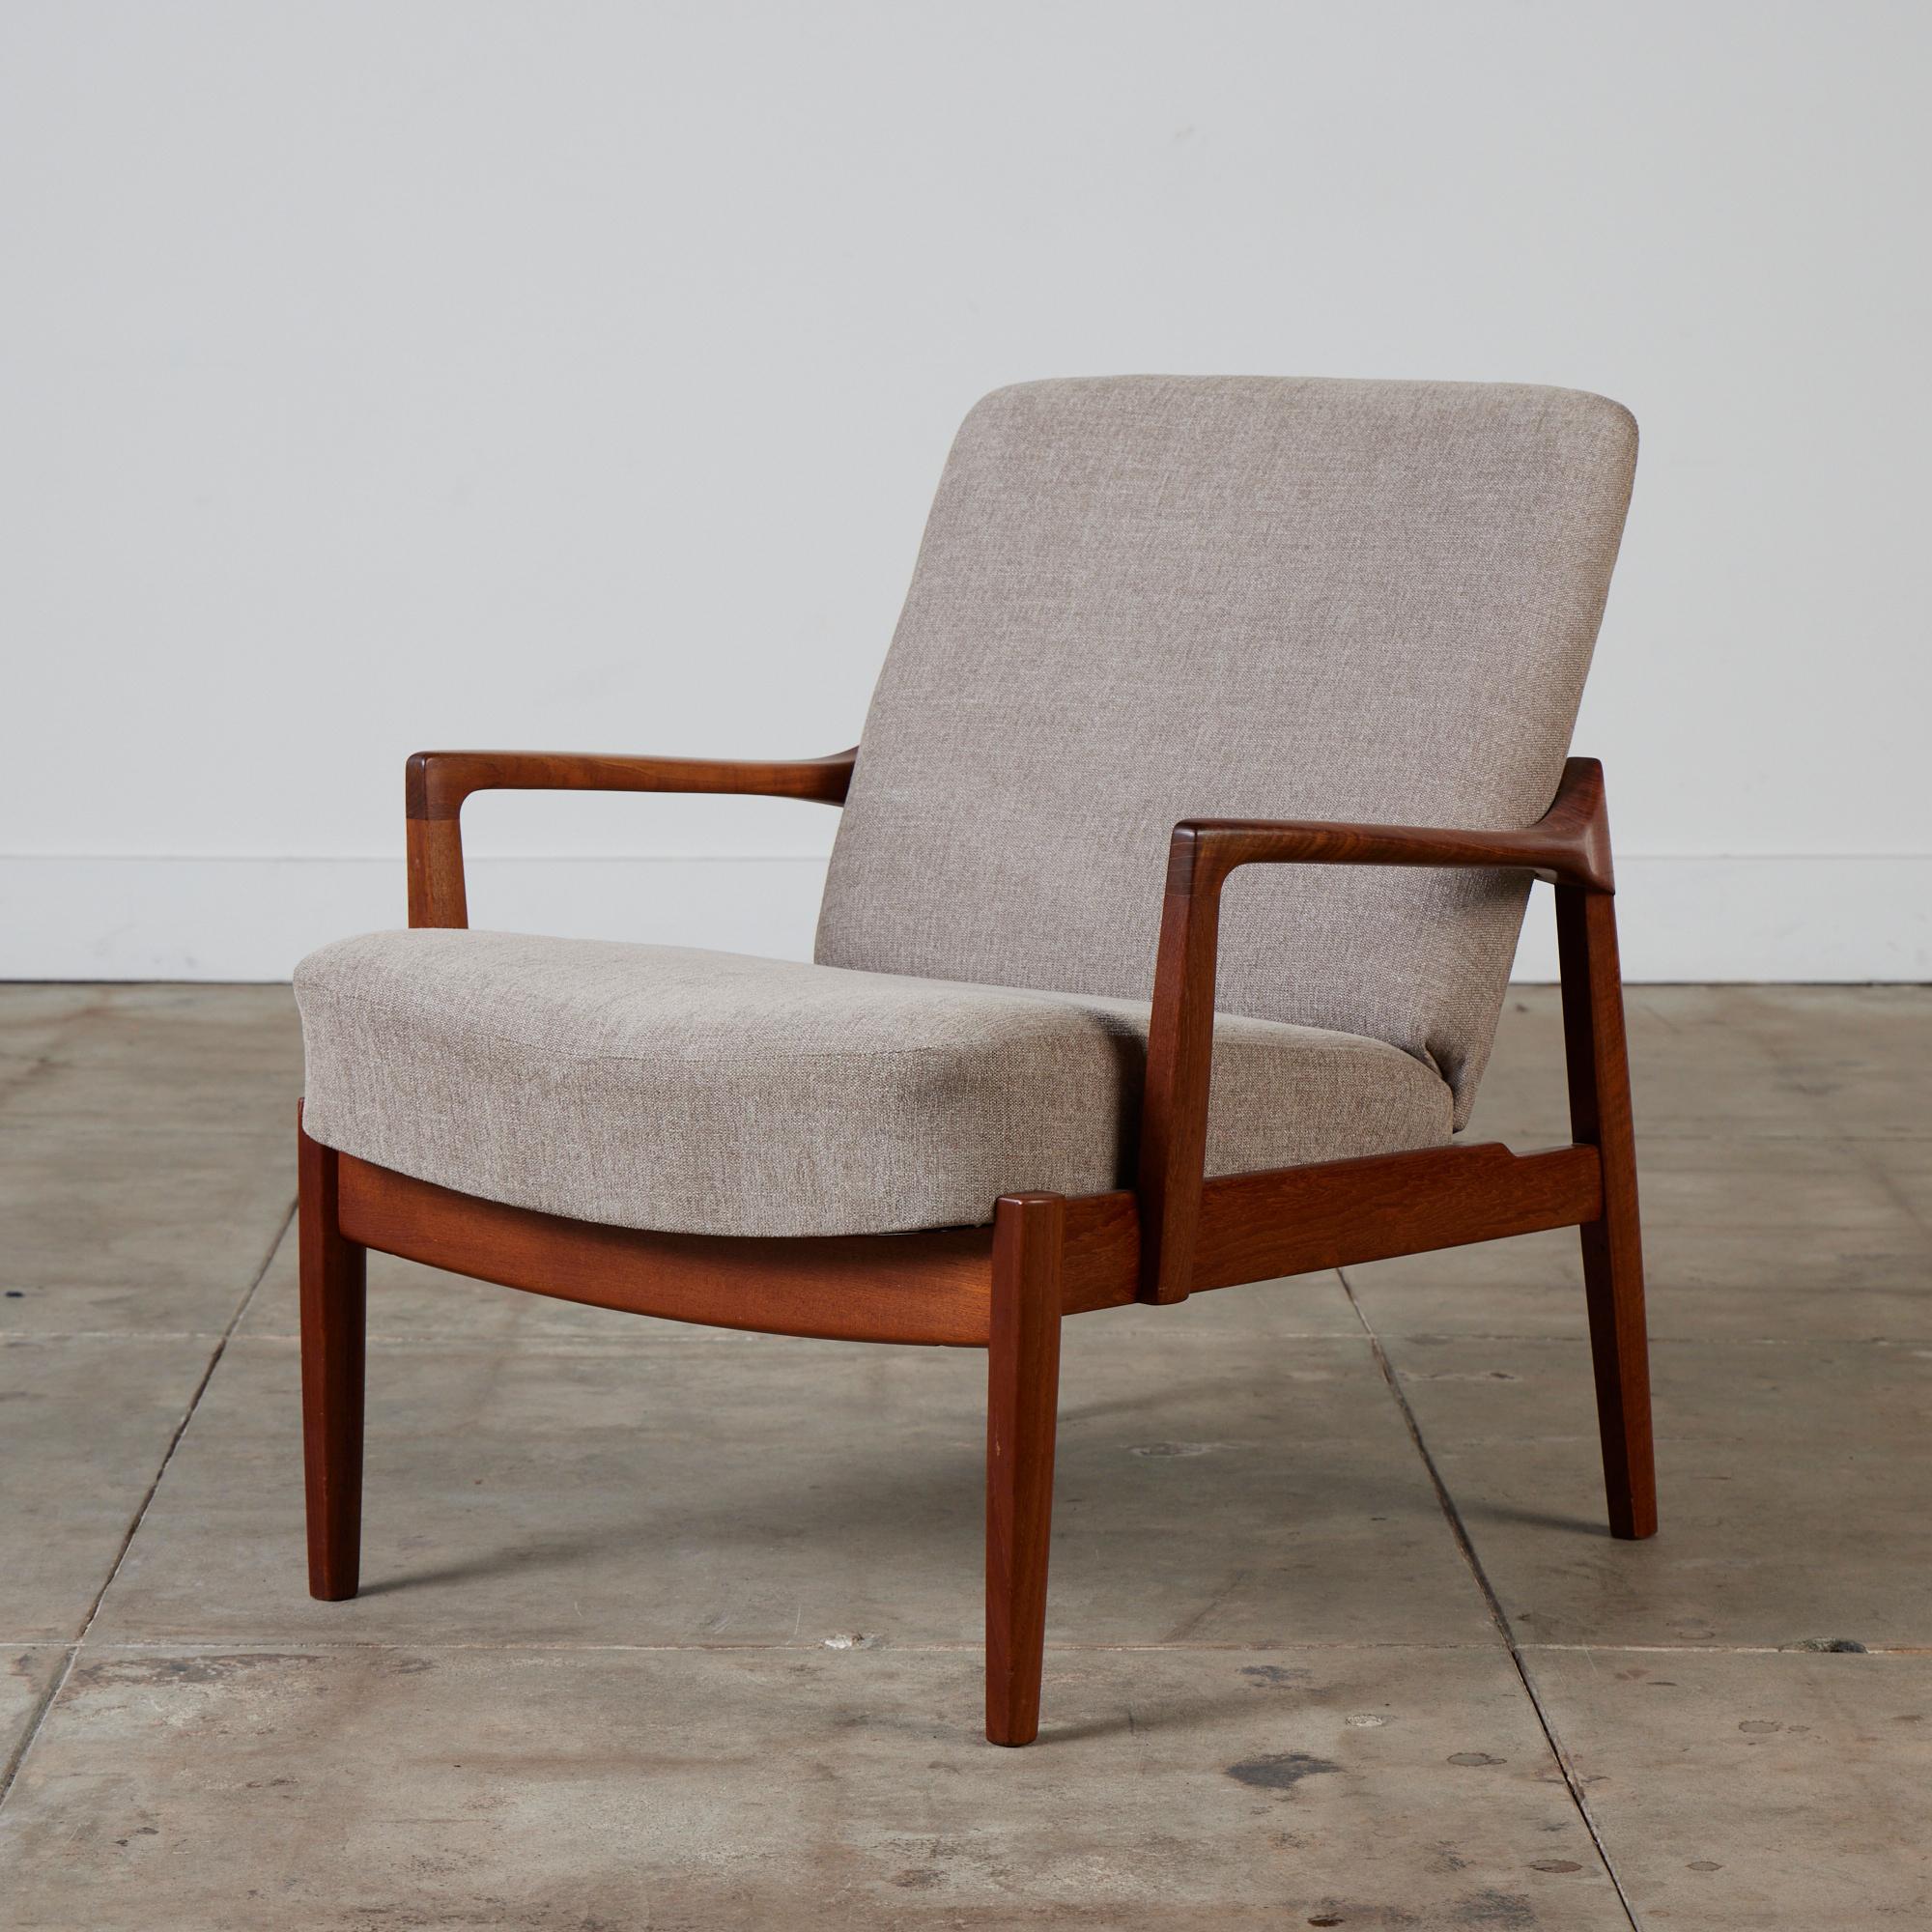 A low, Danish lounge chair by husband and wife design team Tove and Edvard Kindt-Larsen for France & Son. This example from 1958 has a teak frame around fixed cushions, upholstered in a soft taupe textile. The design is distinguished by its bowed